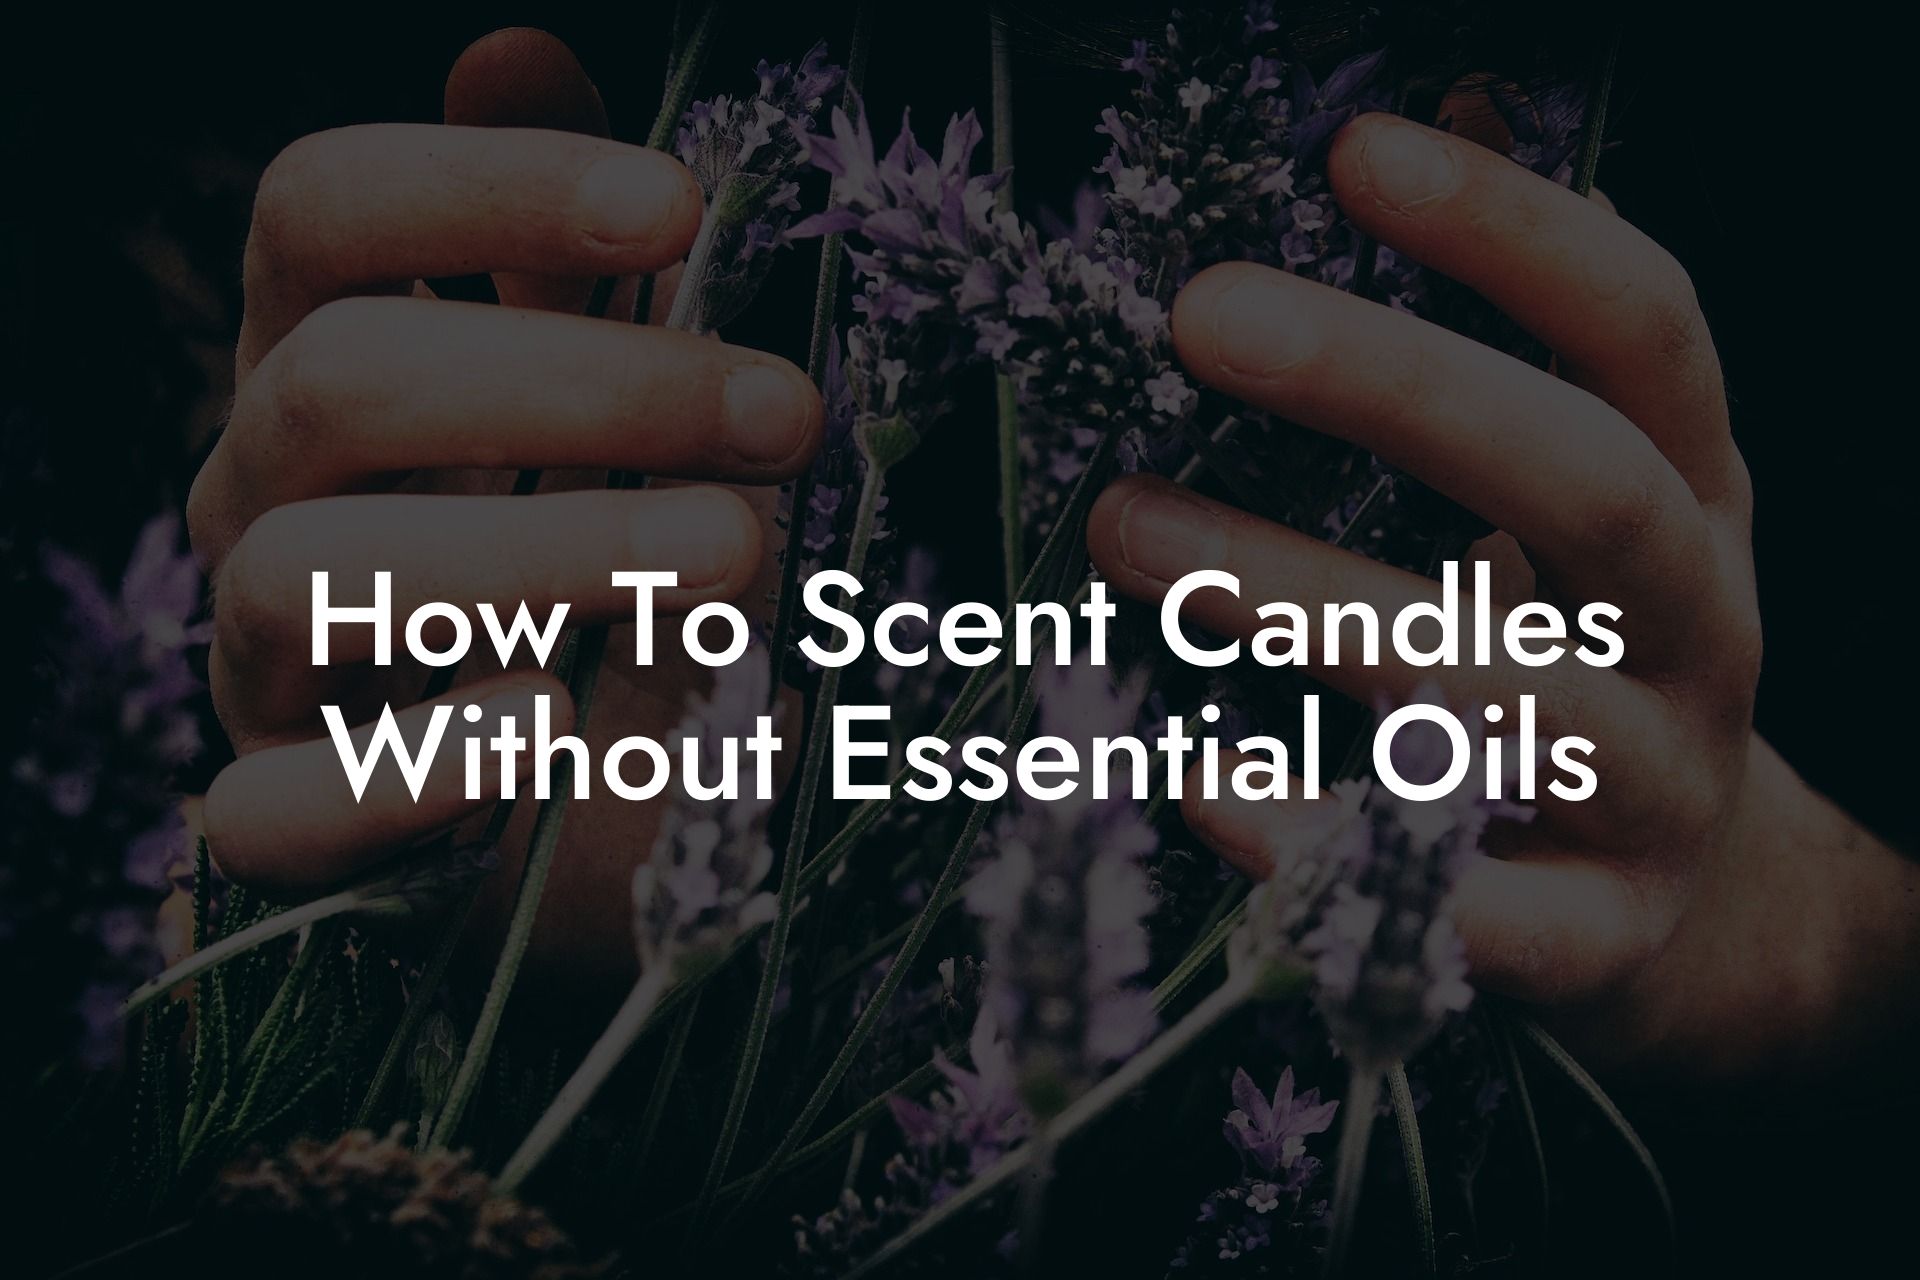 How To Scent Candles Without Essential Oils